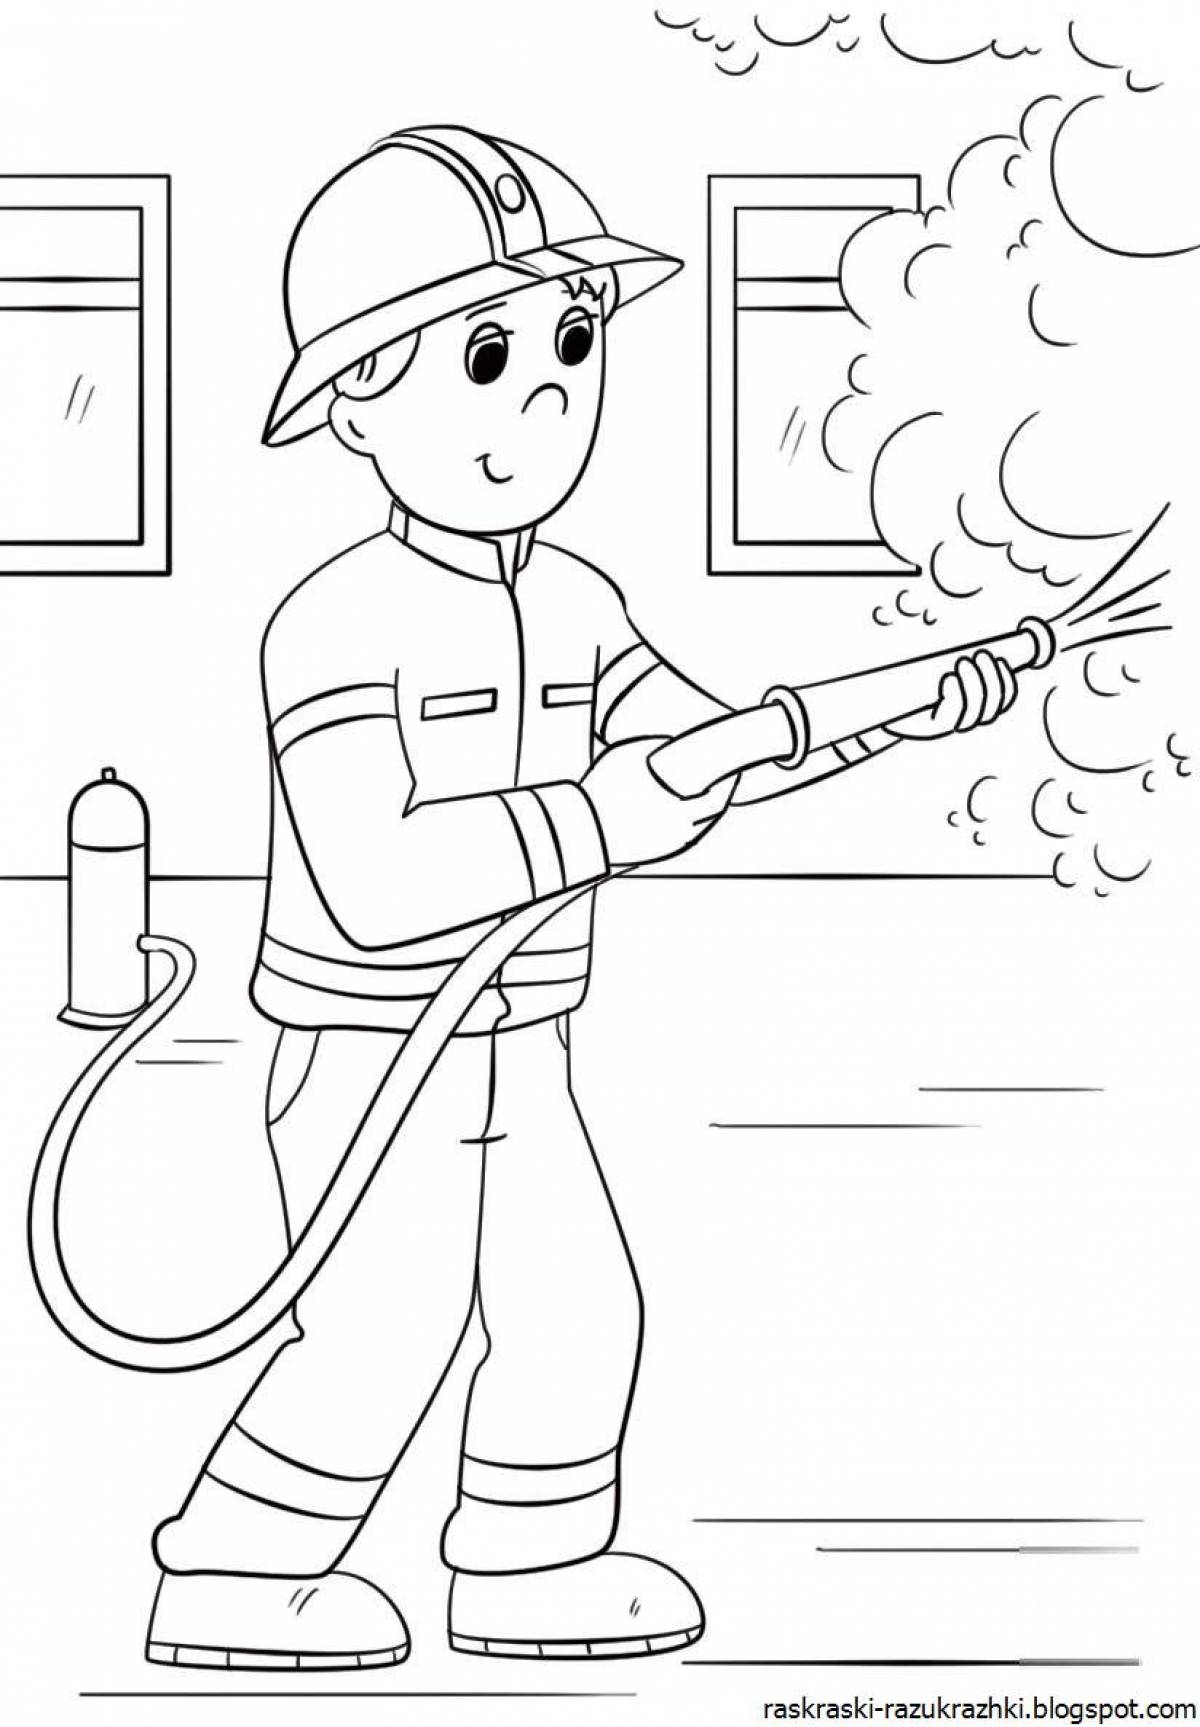 Great firefighter coloring book for kids